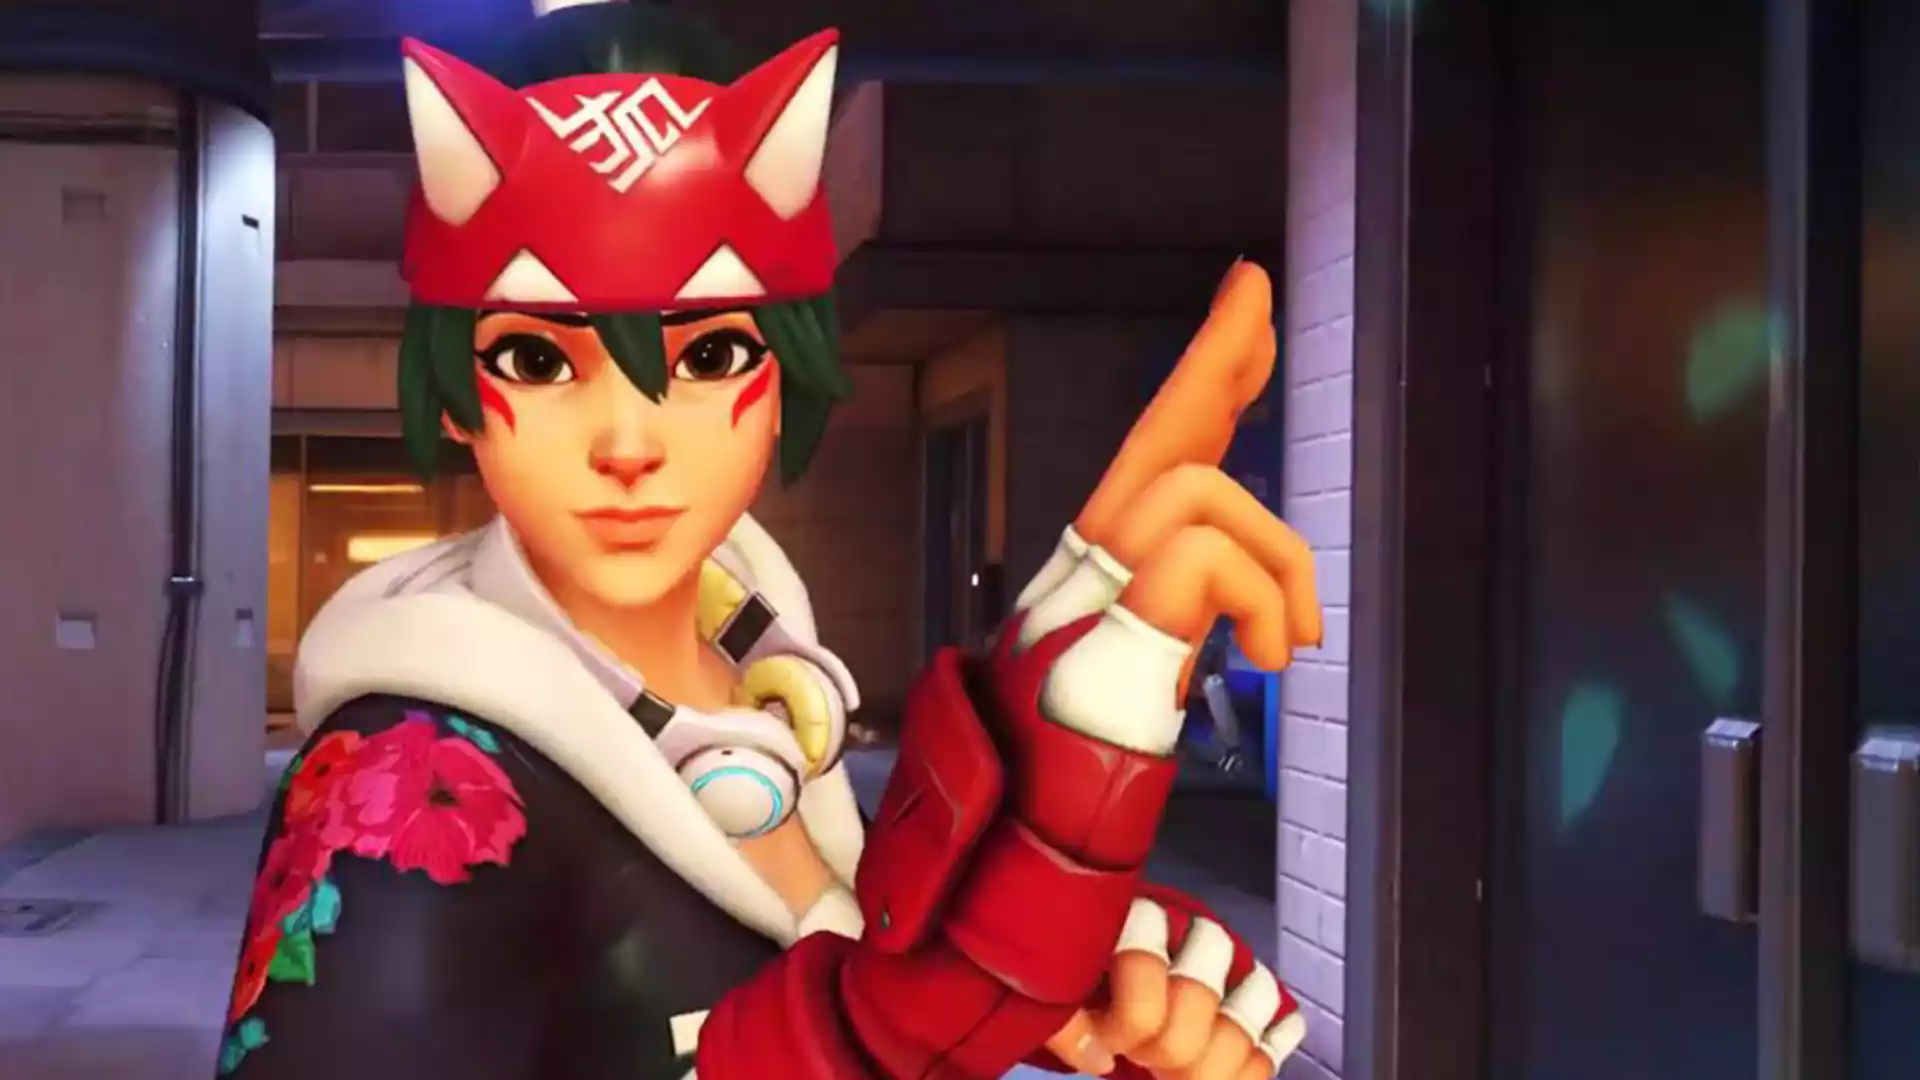 Overwatch 2 shows new heroine with teleport ability